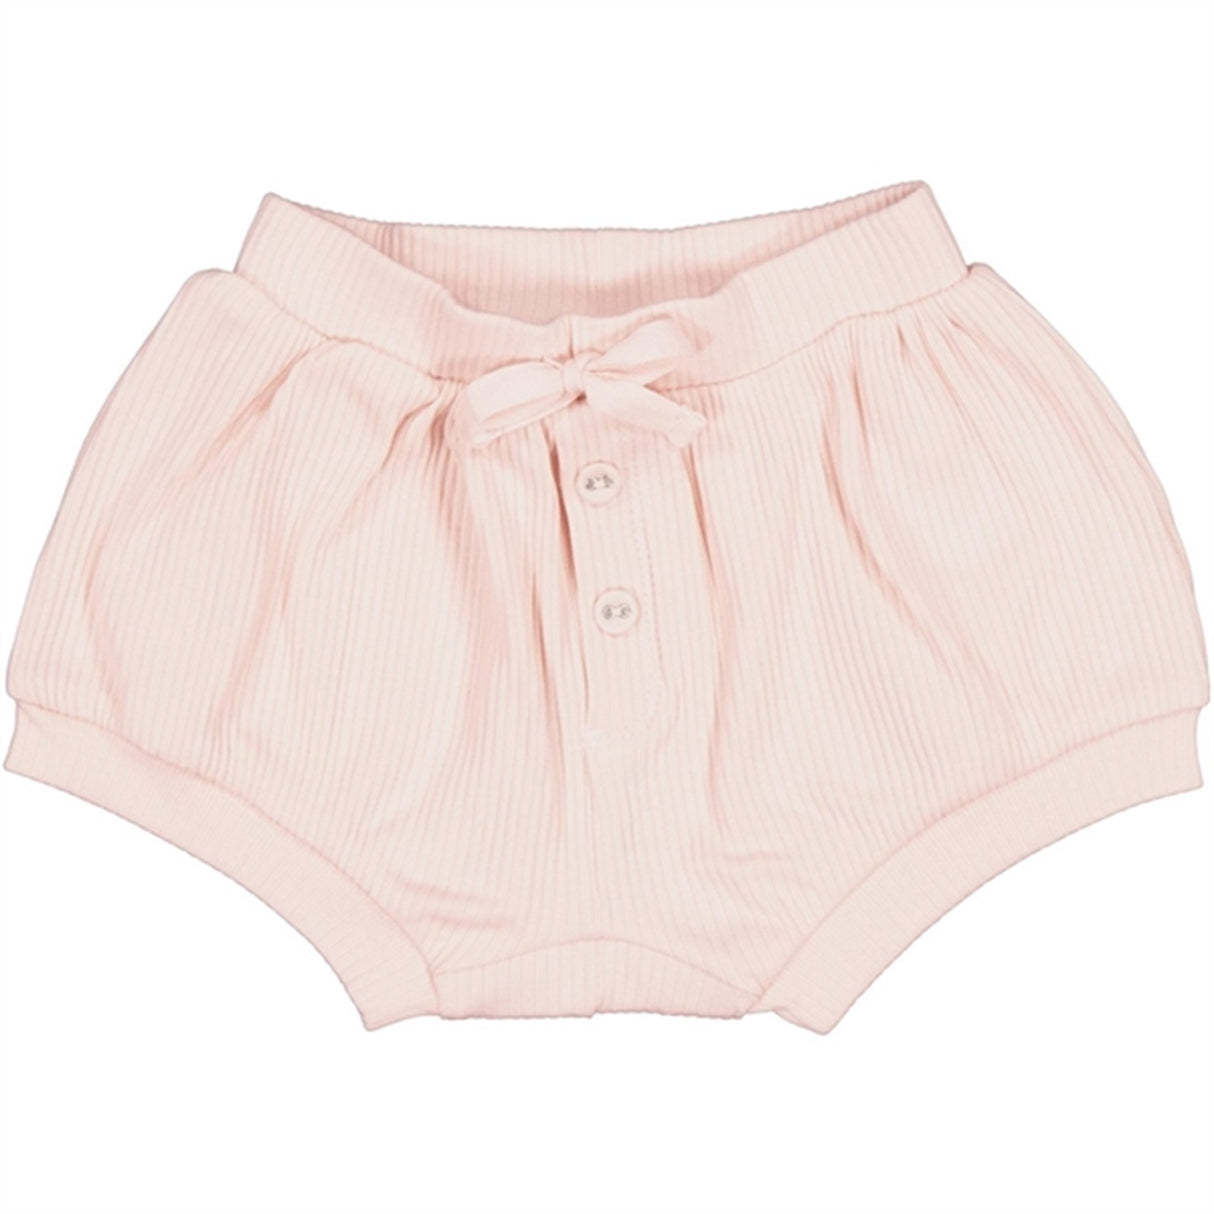 MarMar Modal Barely Rose Bloomers